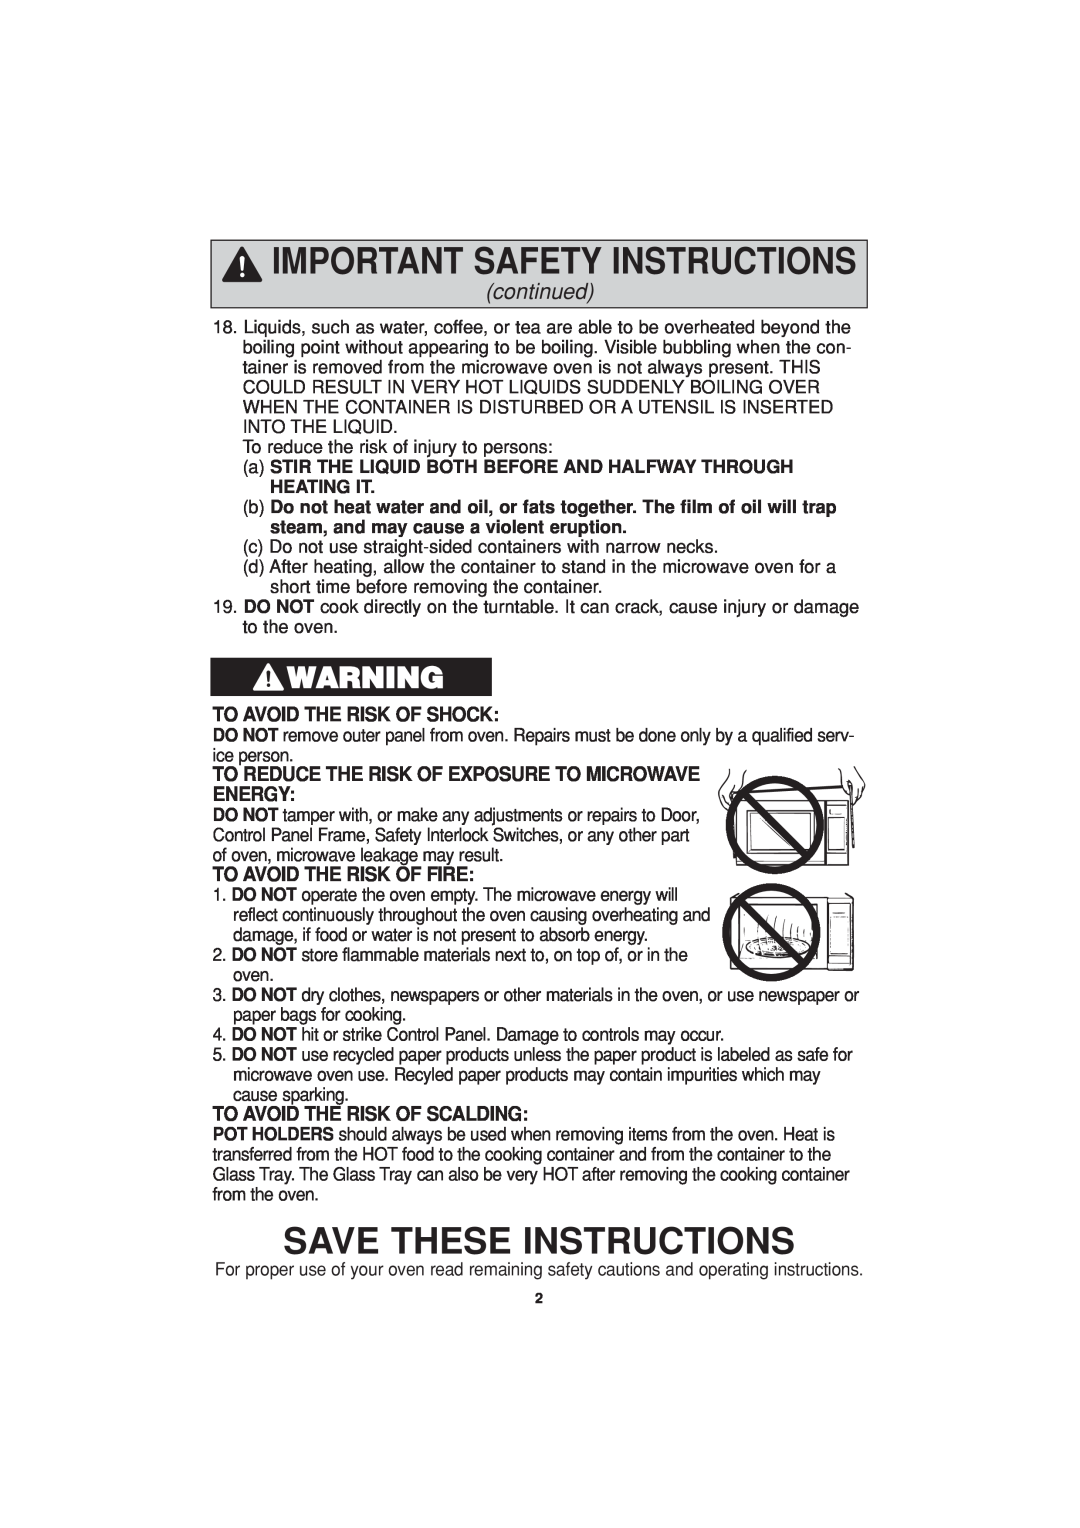 Panasonic NN-H604 Save These Instructions, continued, To Avoid The Risk Of Shock, Energy, To Avoid The Risk Of Fire 